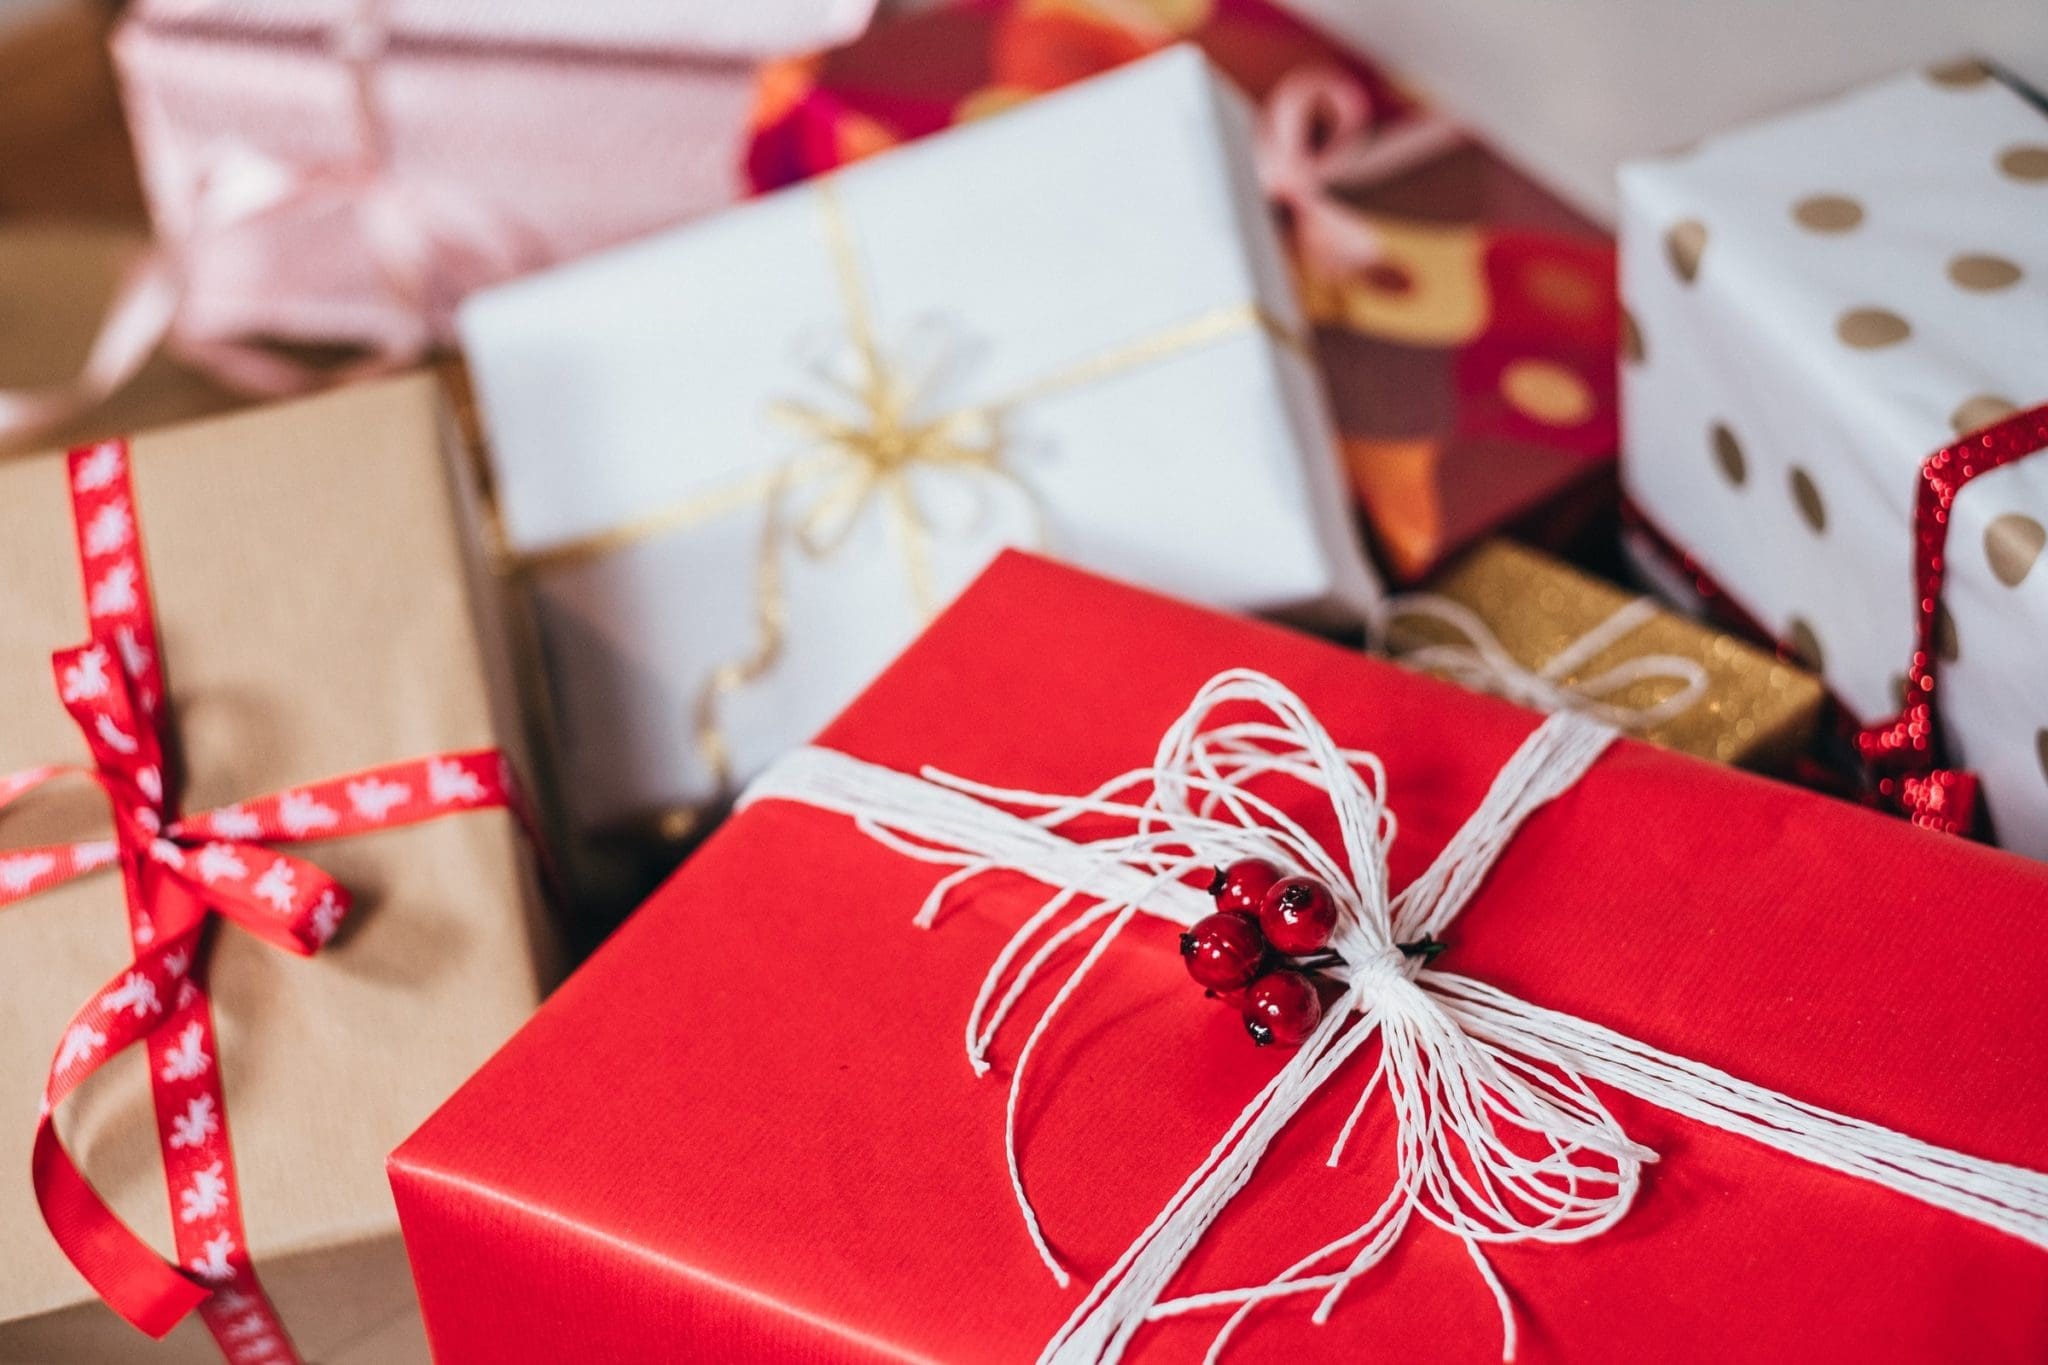 Tax implications for Xmas parties & gifts in 2020